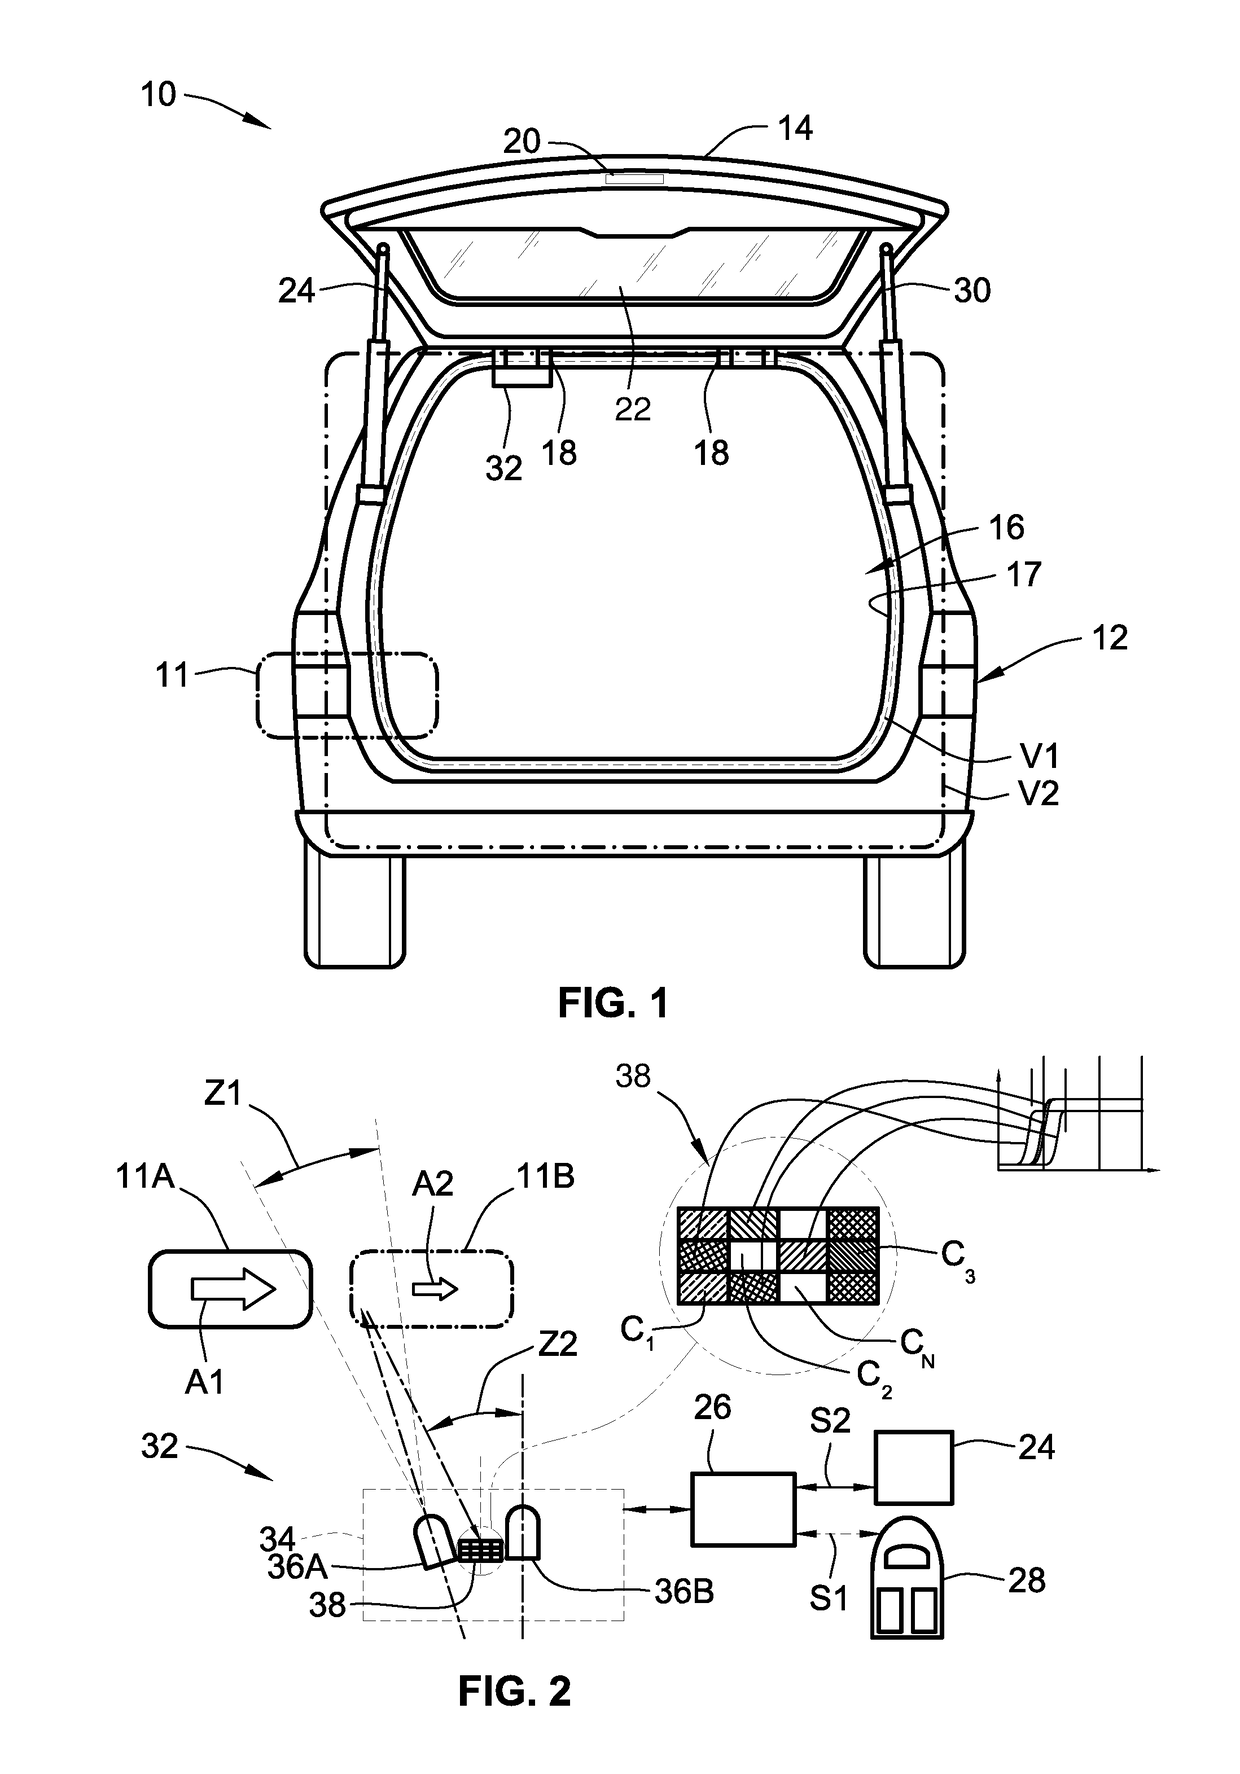 Foreign object detection systems and control logic for vehicle compartment closure assemblies